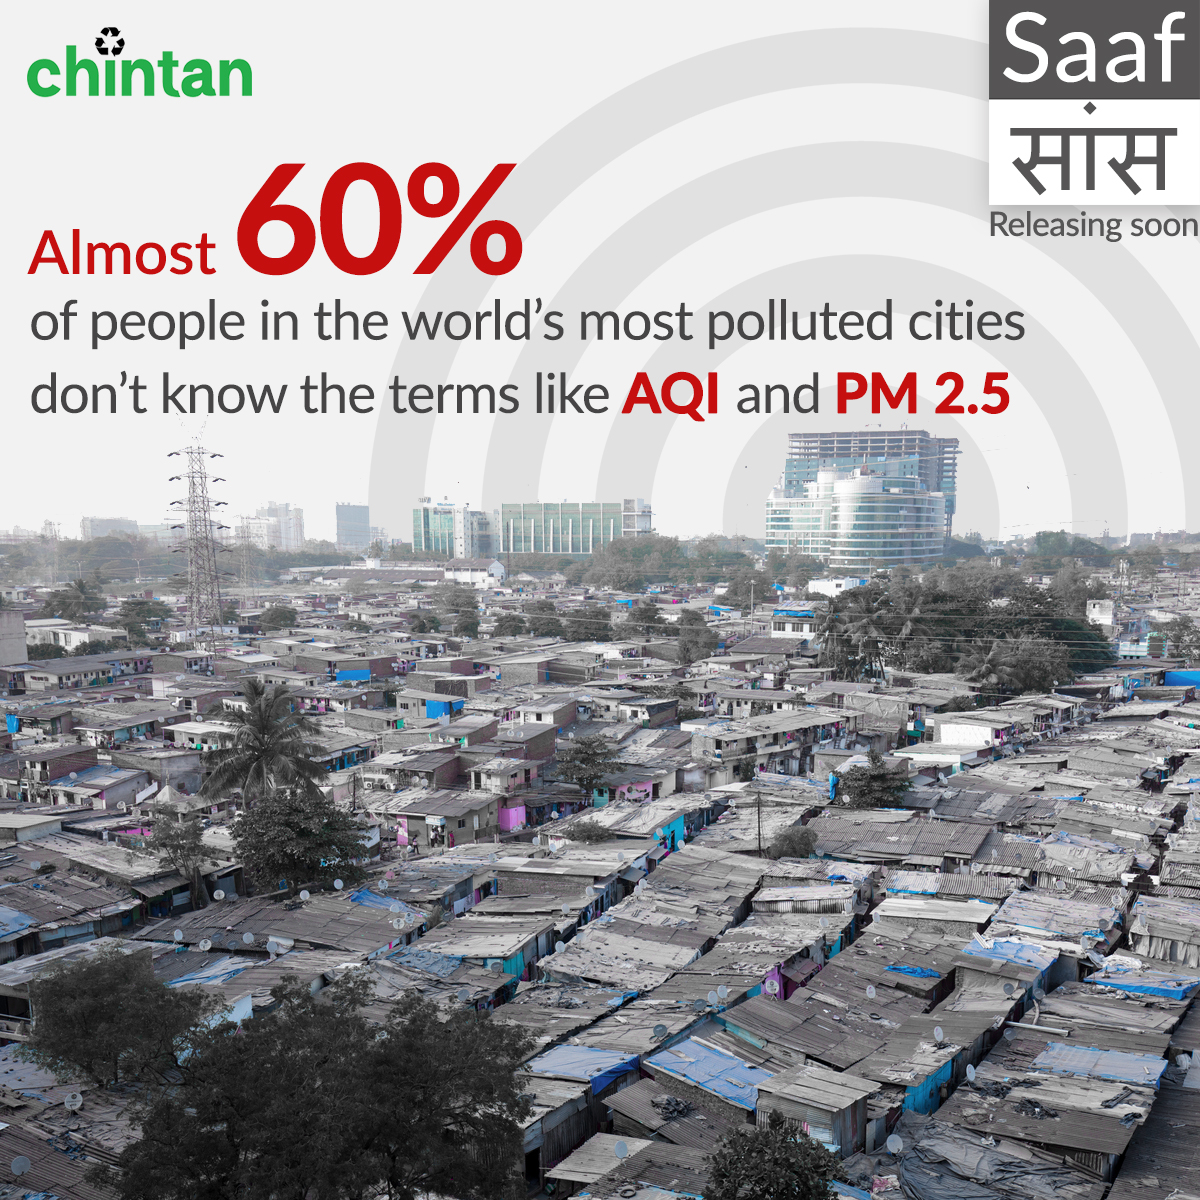 Most people in #Delhi NCR, world’s most polluted national capital region (due to monitoring devices) don't know #AirPollution terms like #AQI and PM 2.5. Intriguing findings from Chintan's #SaafSaans report releasing this #WorldHealthDay, April 7th! @Bharati09 @CBhattacharji…